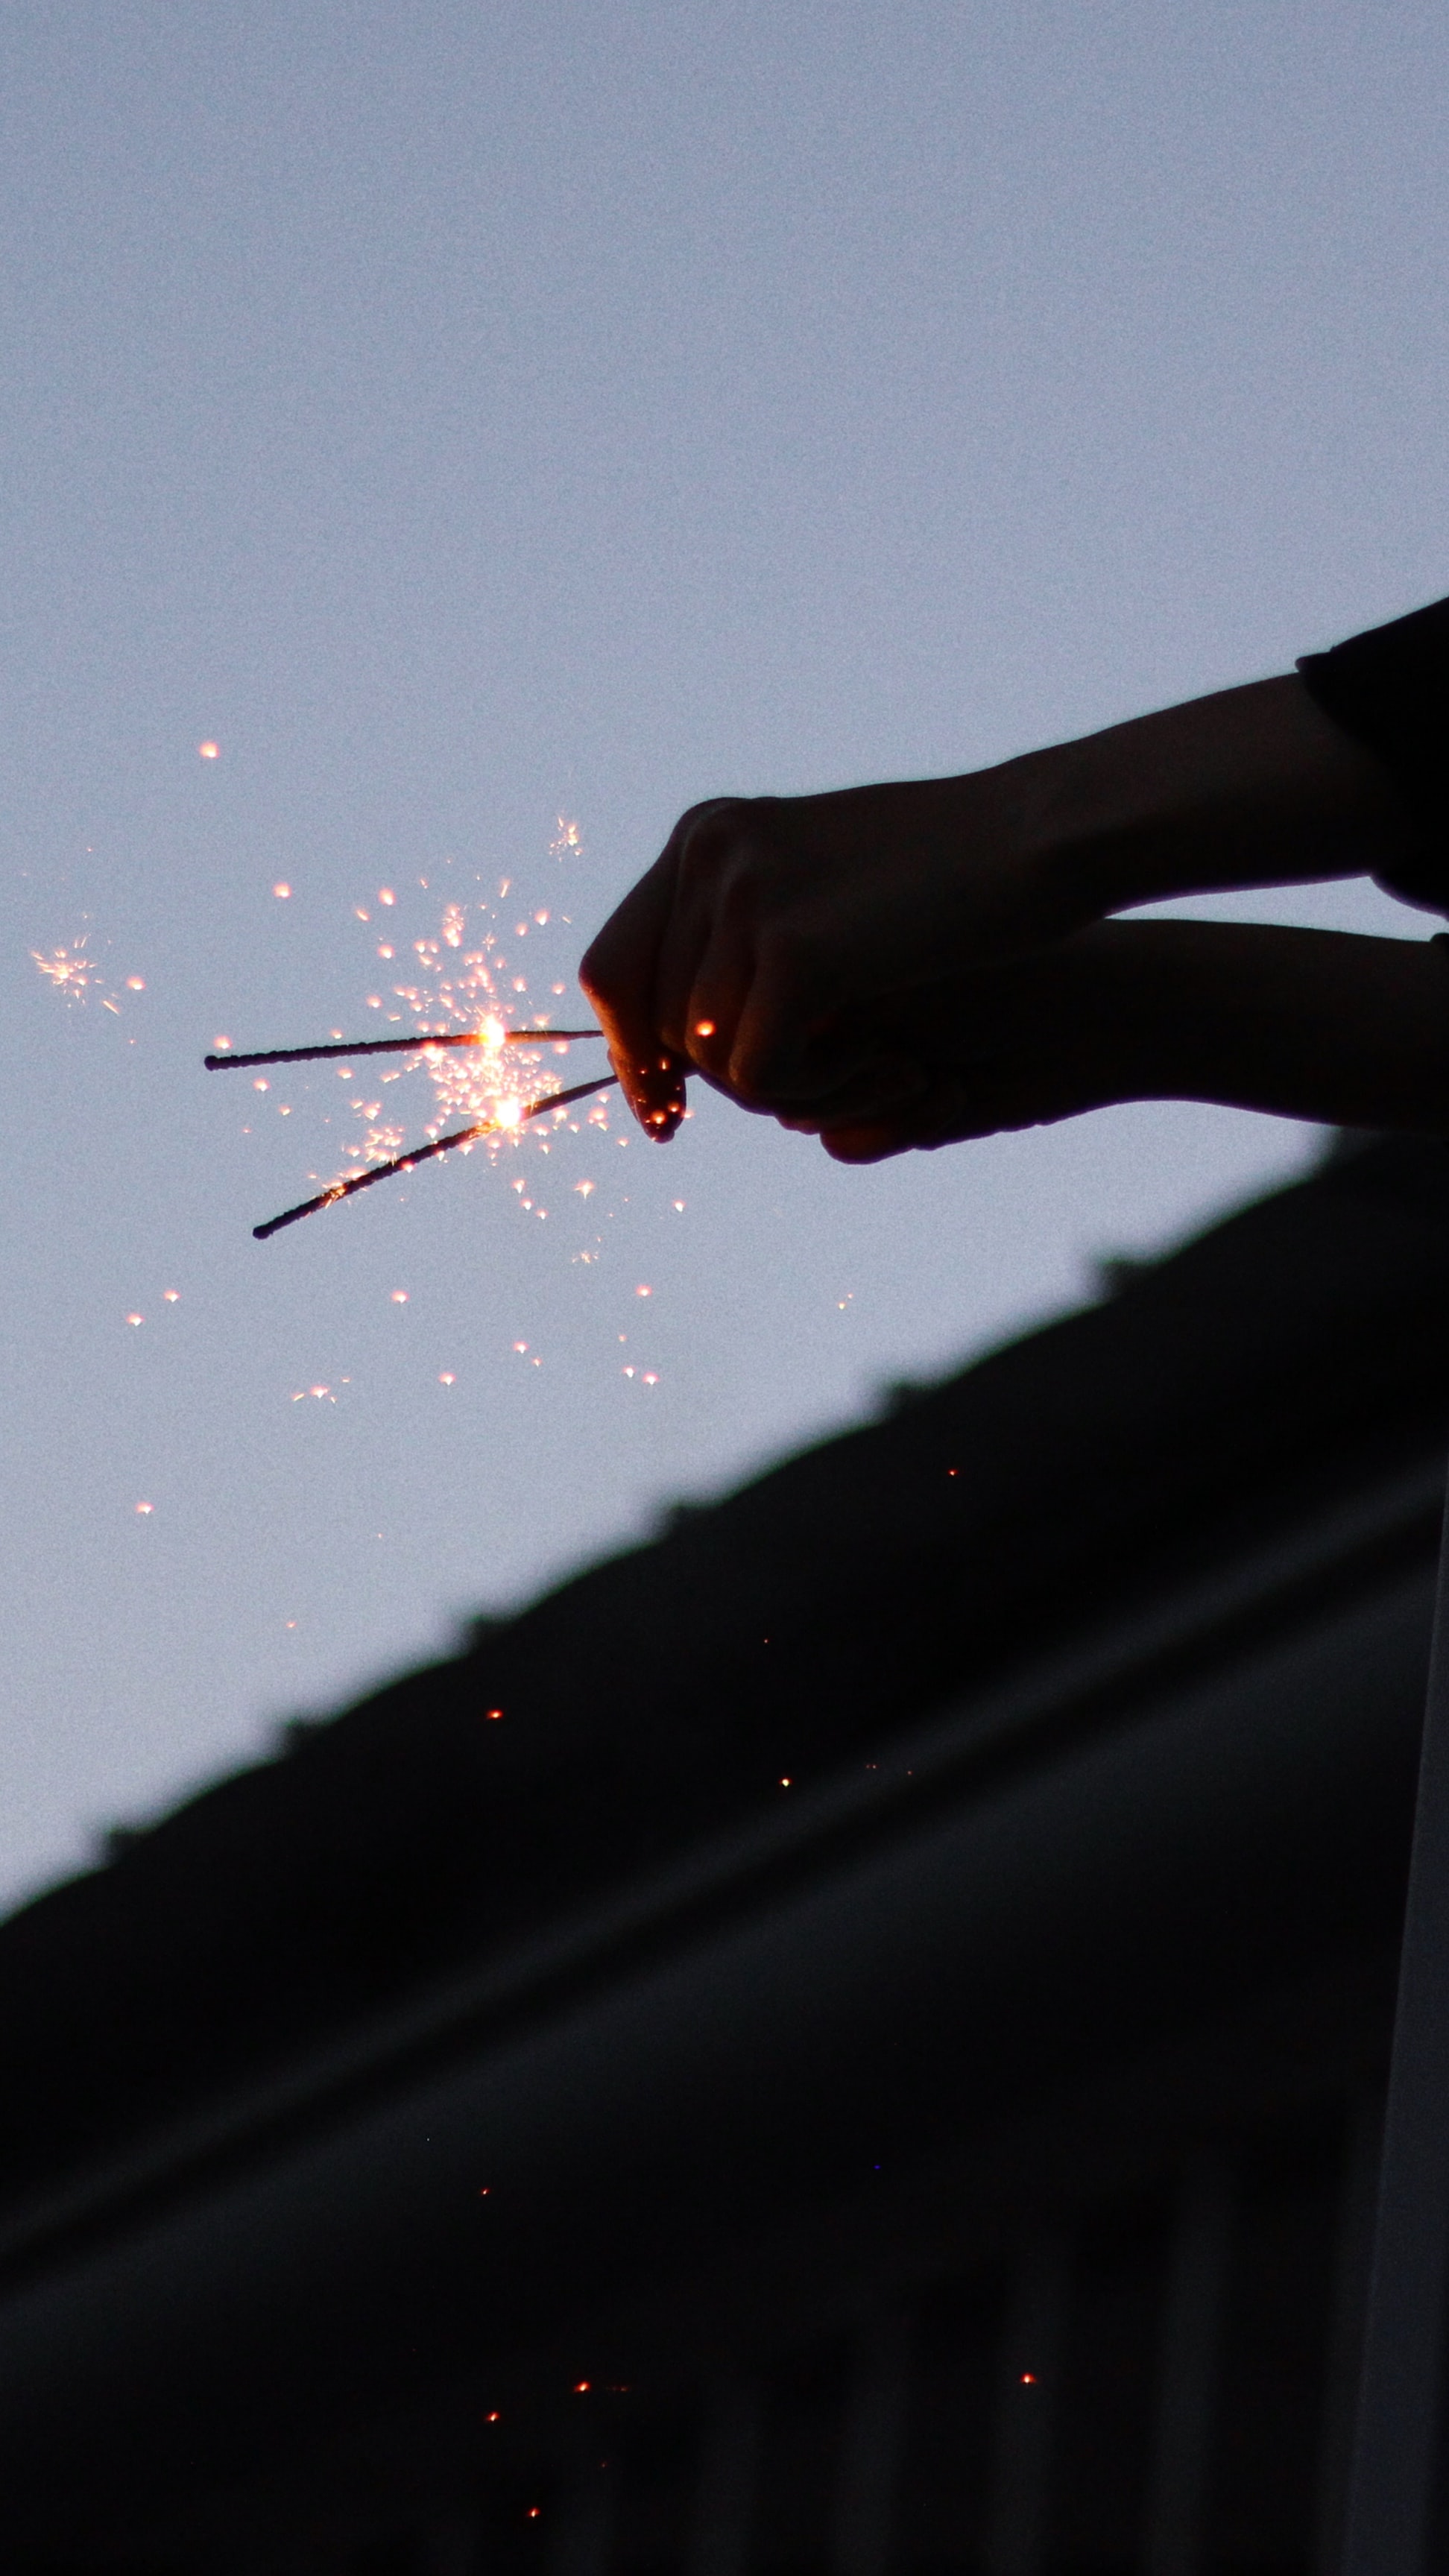 sparks, miscellanea, miscellaneous, hands, bengal lights, sparklers Full HD